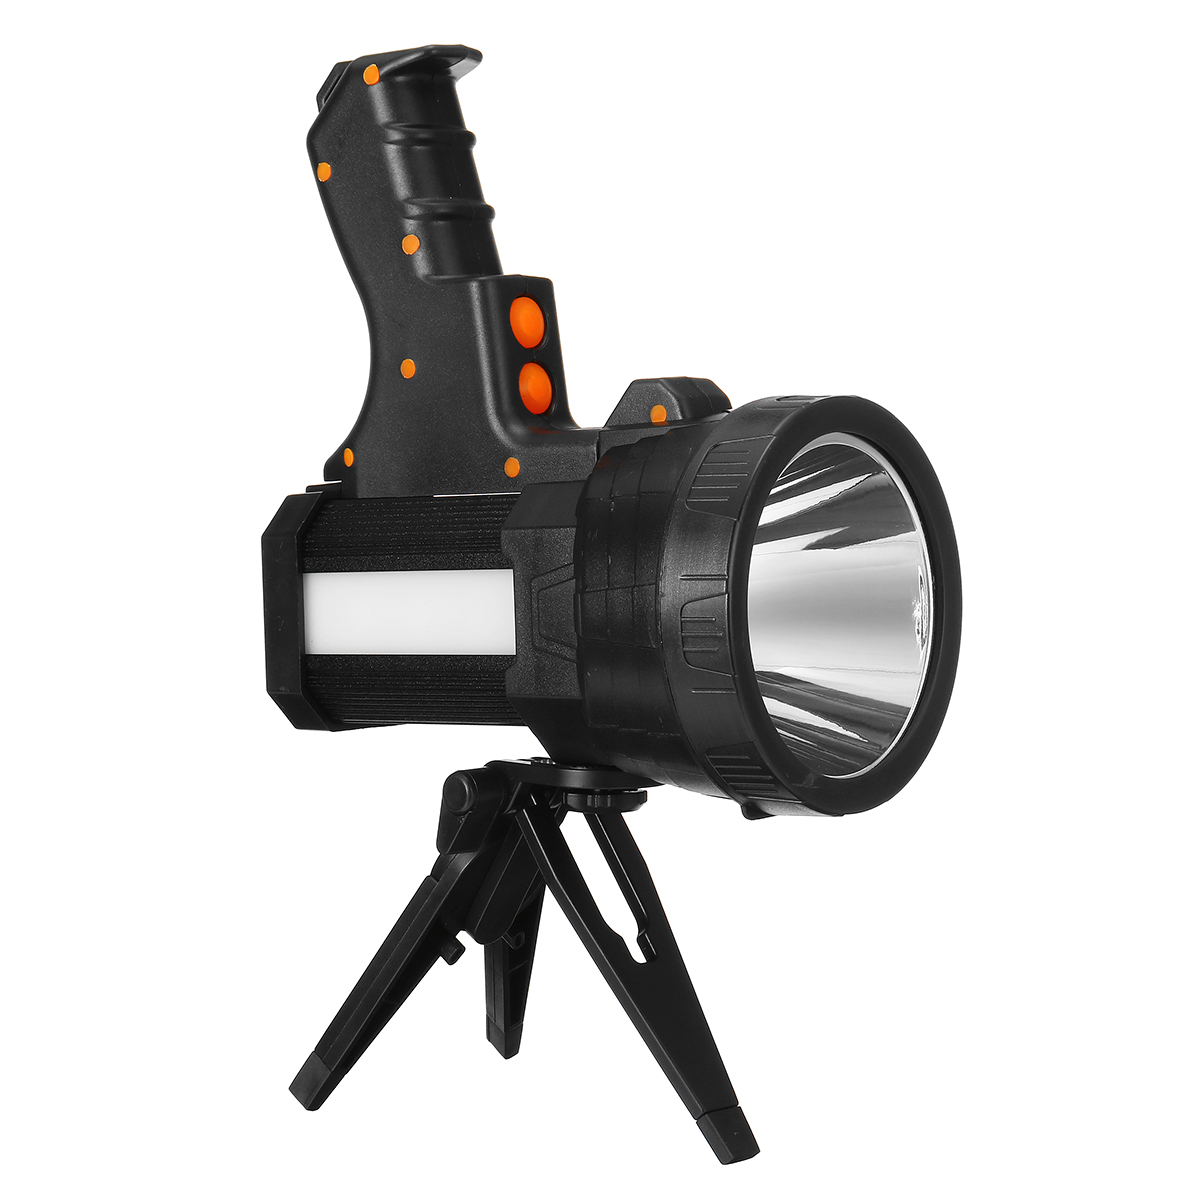 L2-Strong-LED-Spotlight-with-Tripod-USB-Rechargeable-Powerful-Searchlight-Portable-Handle-Flashlight-1756922-4